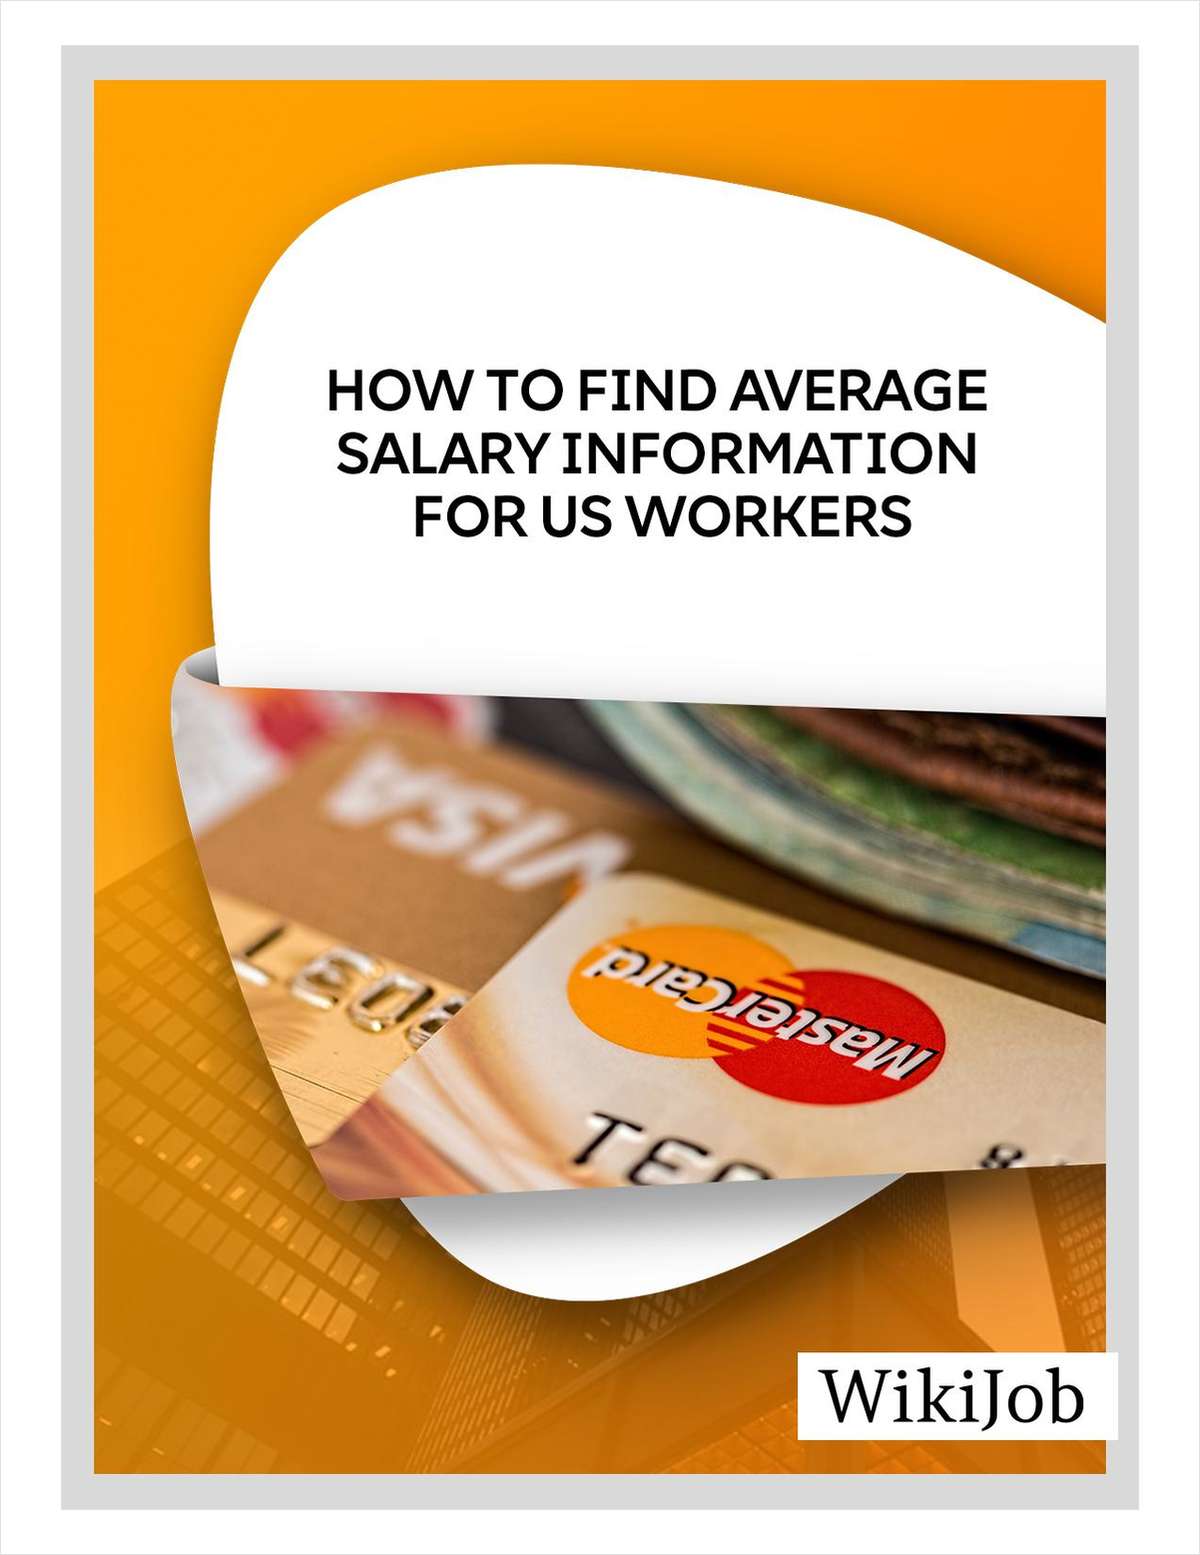 How to Find Average Salary Information for US Workers